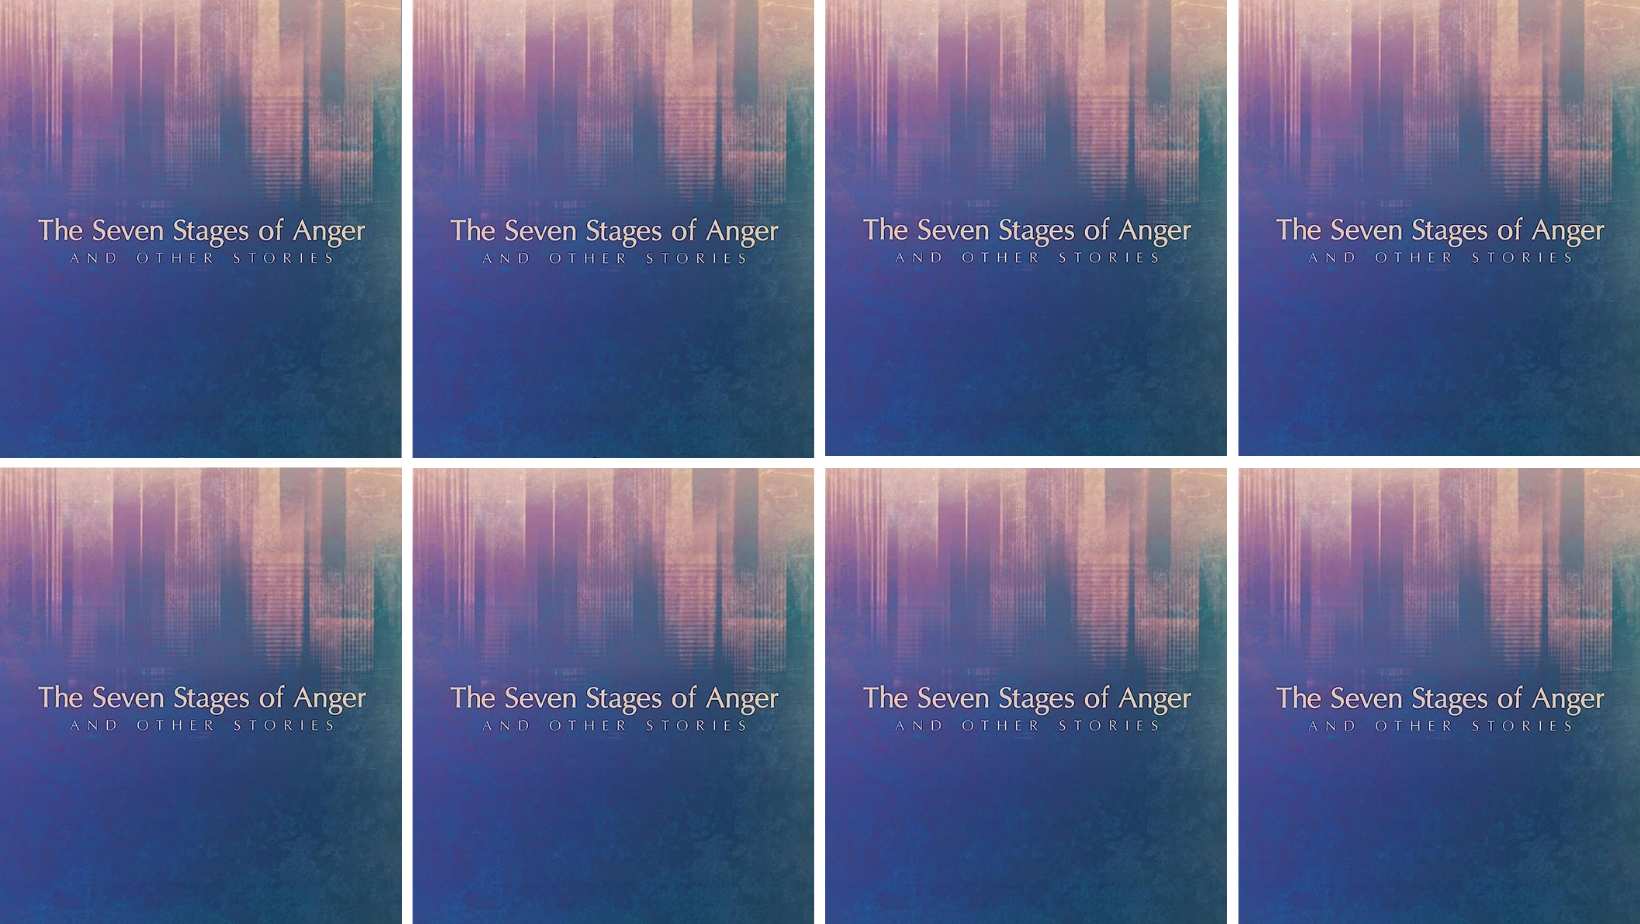 The Seven Stages of Anger feature